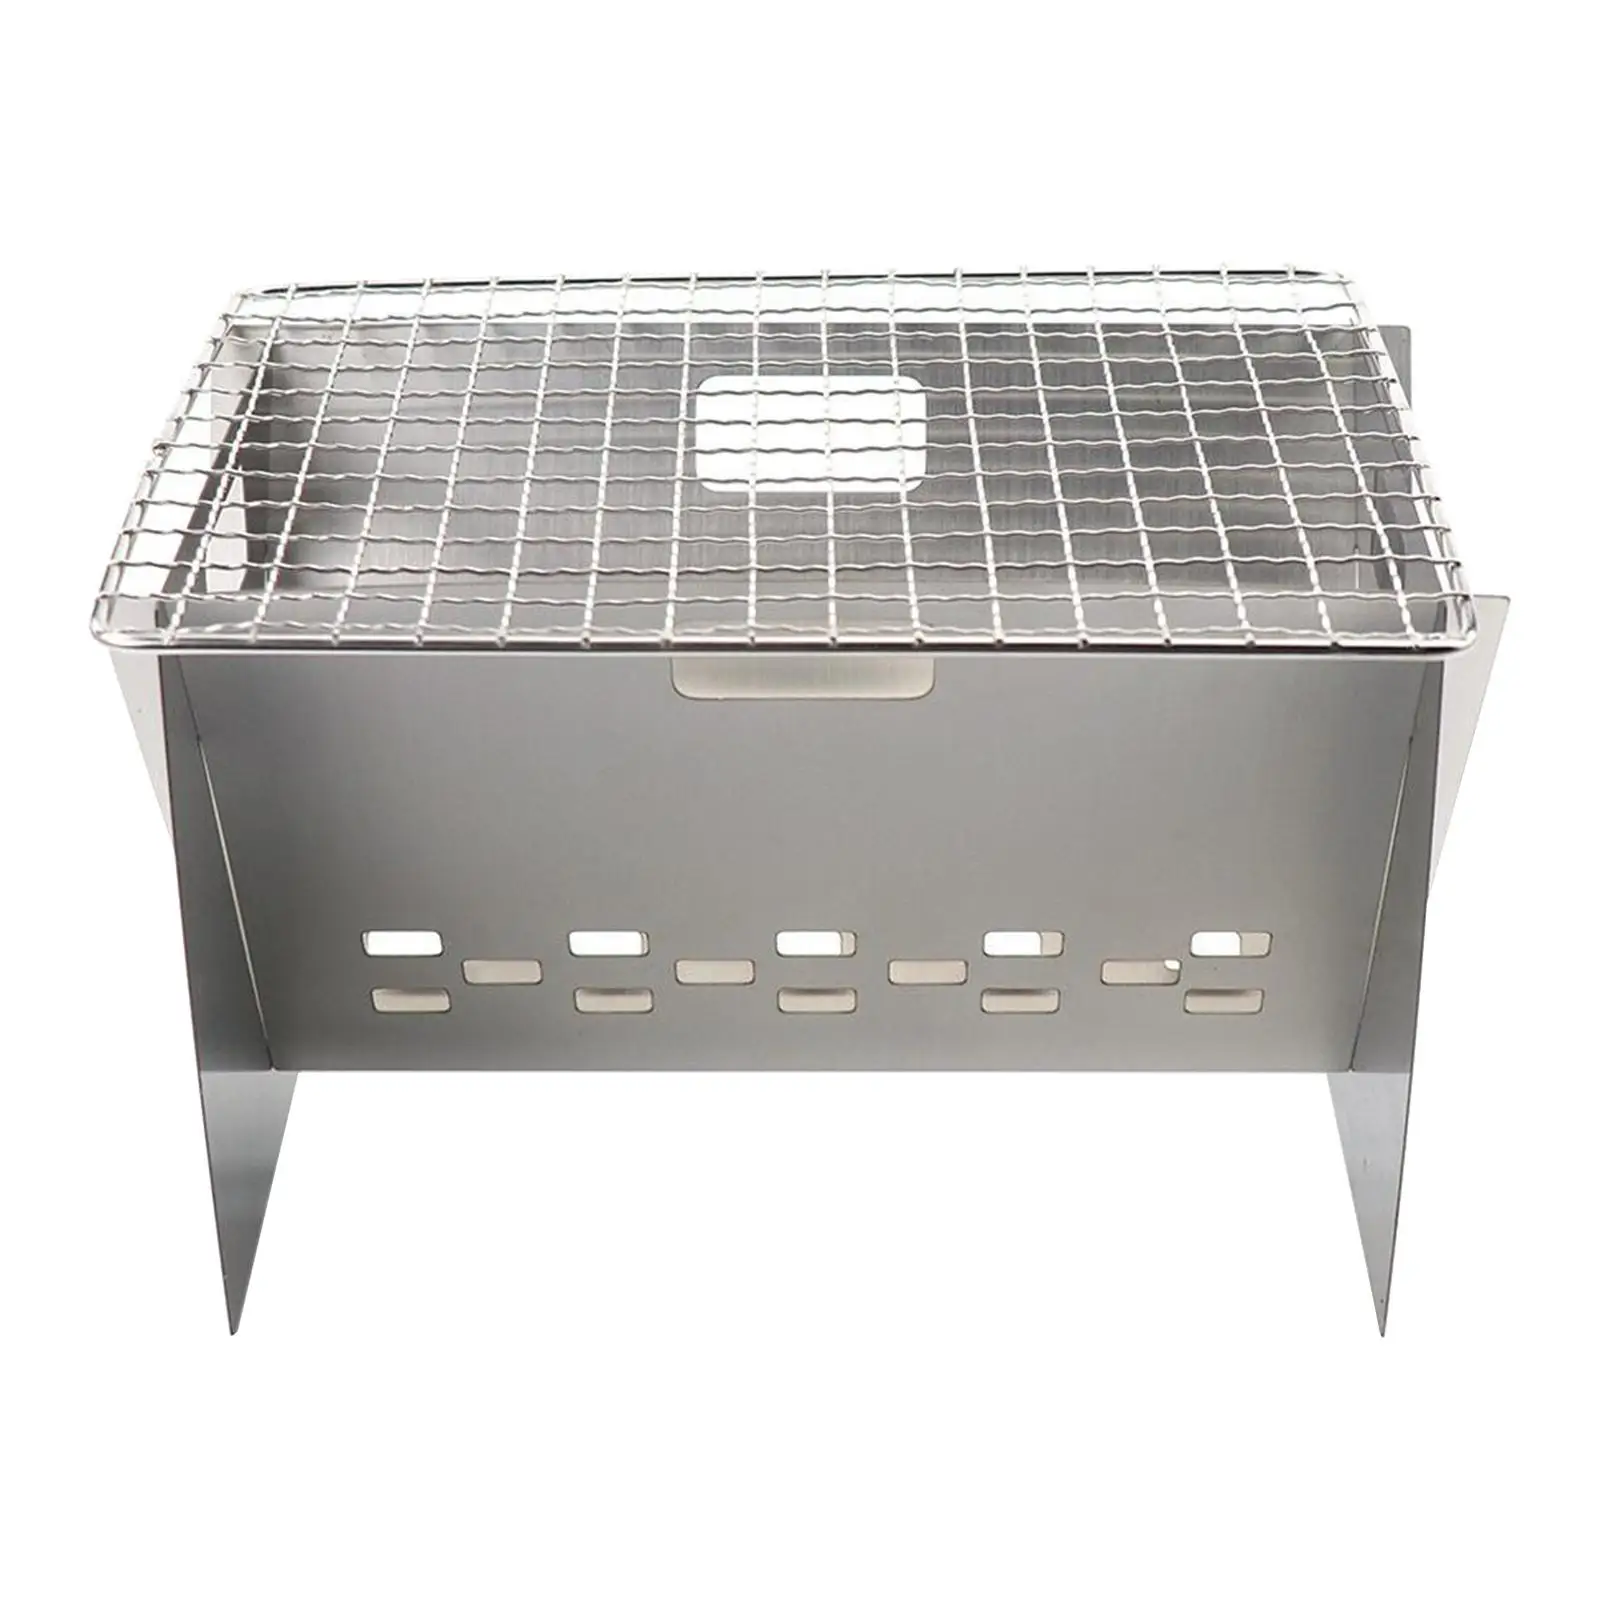 Outdoor BBQ Camping Grill   Burner for Camping BBQ Barbecue Picnic